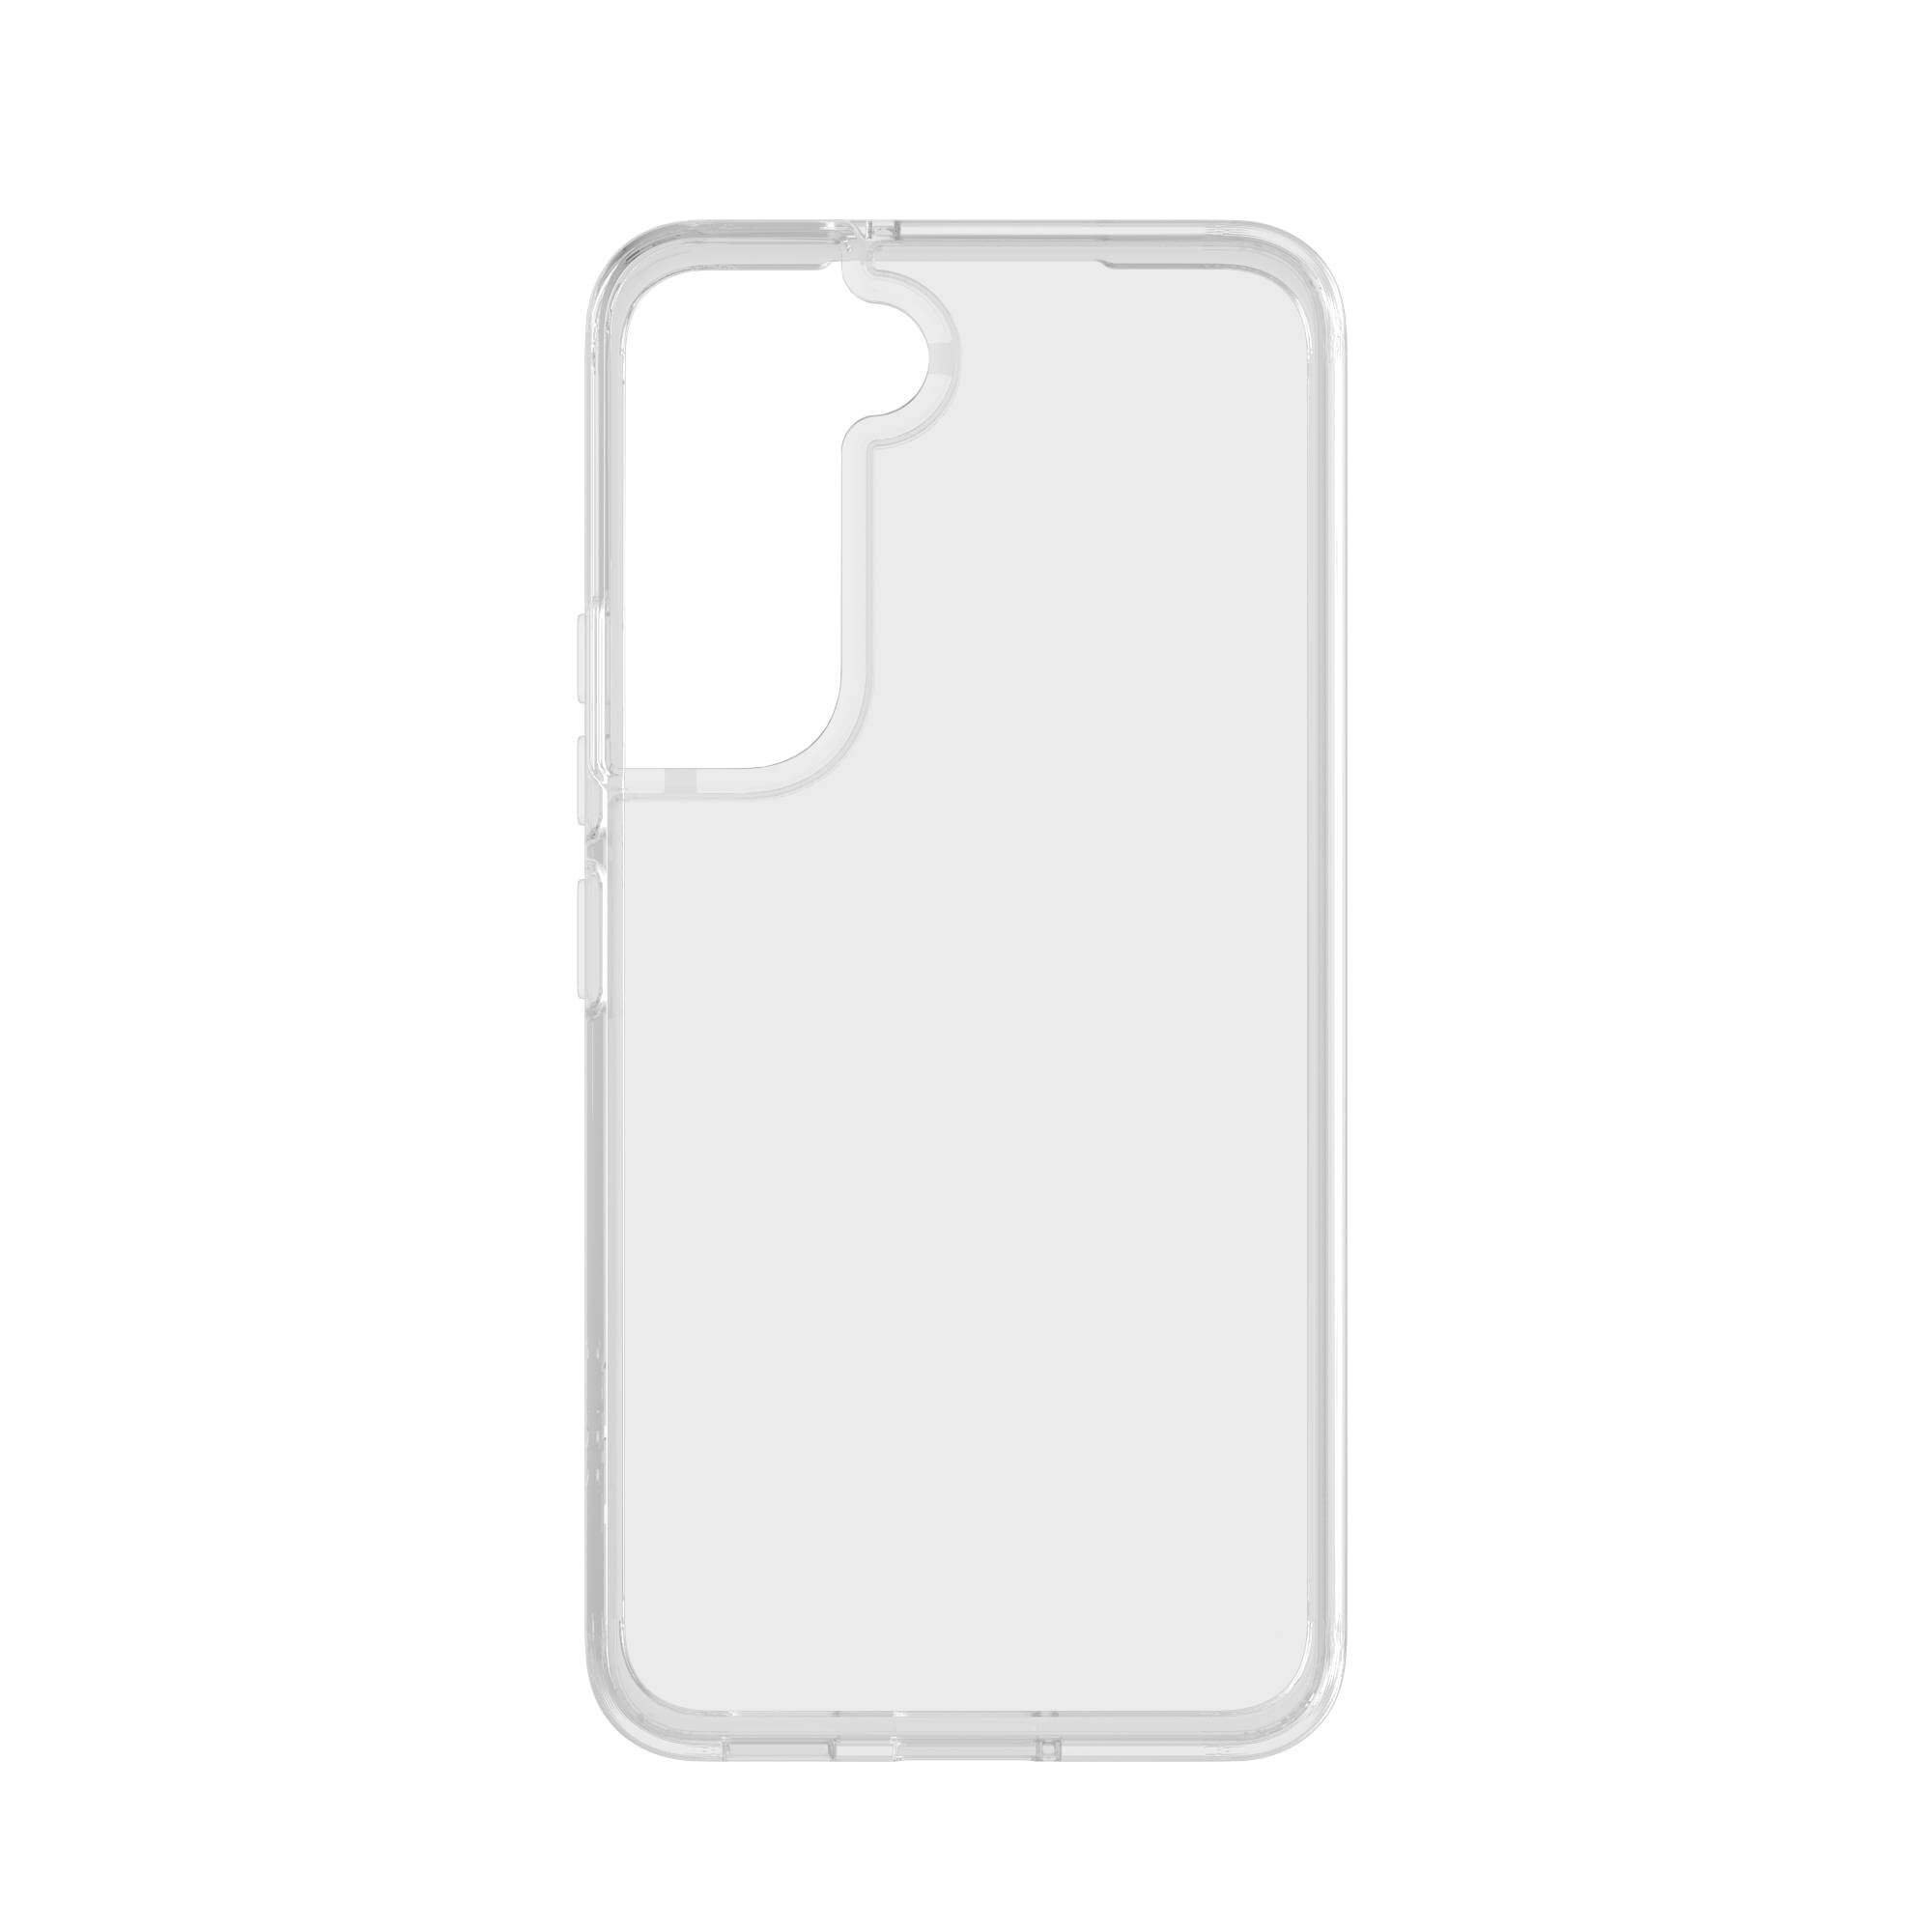 Galaxy SKECH Crystal, S22+ Backcover, transparent 5G, Samsung,